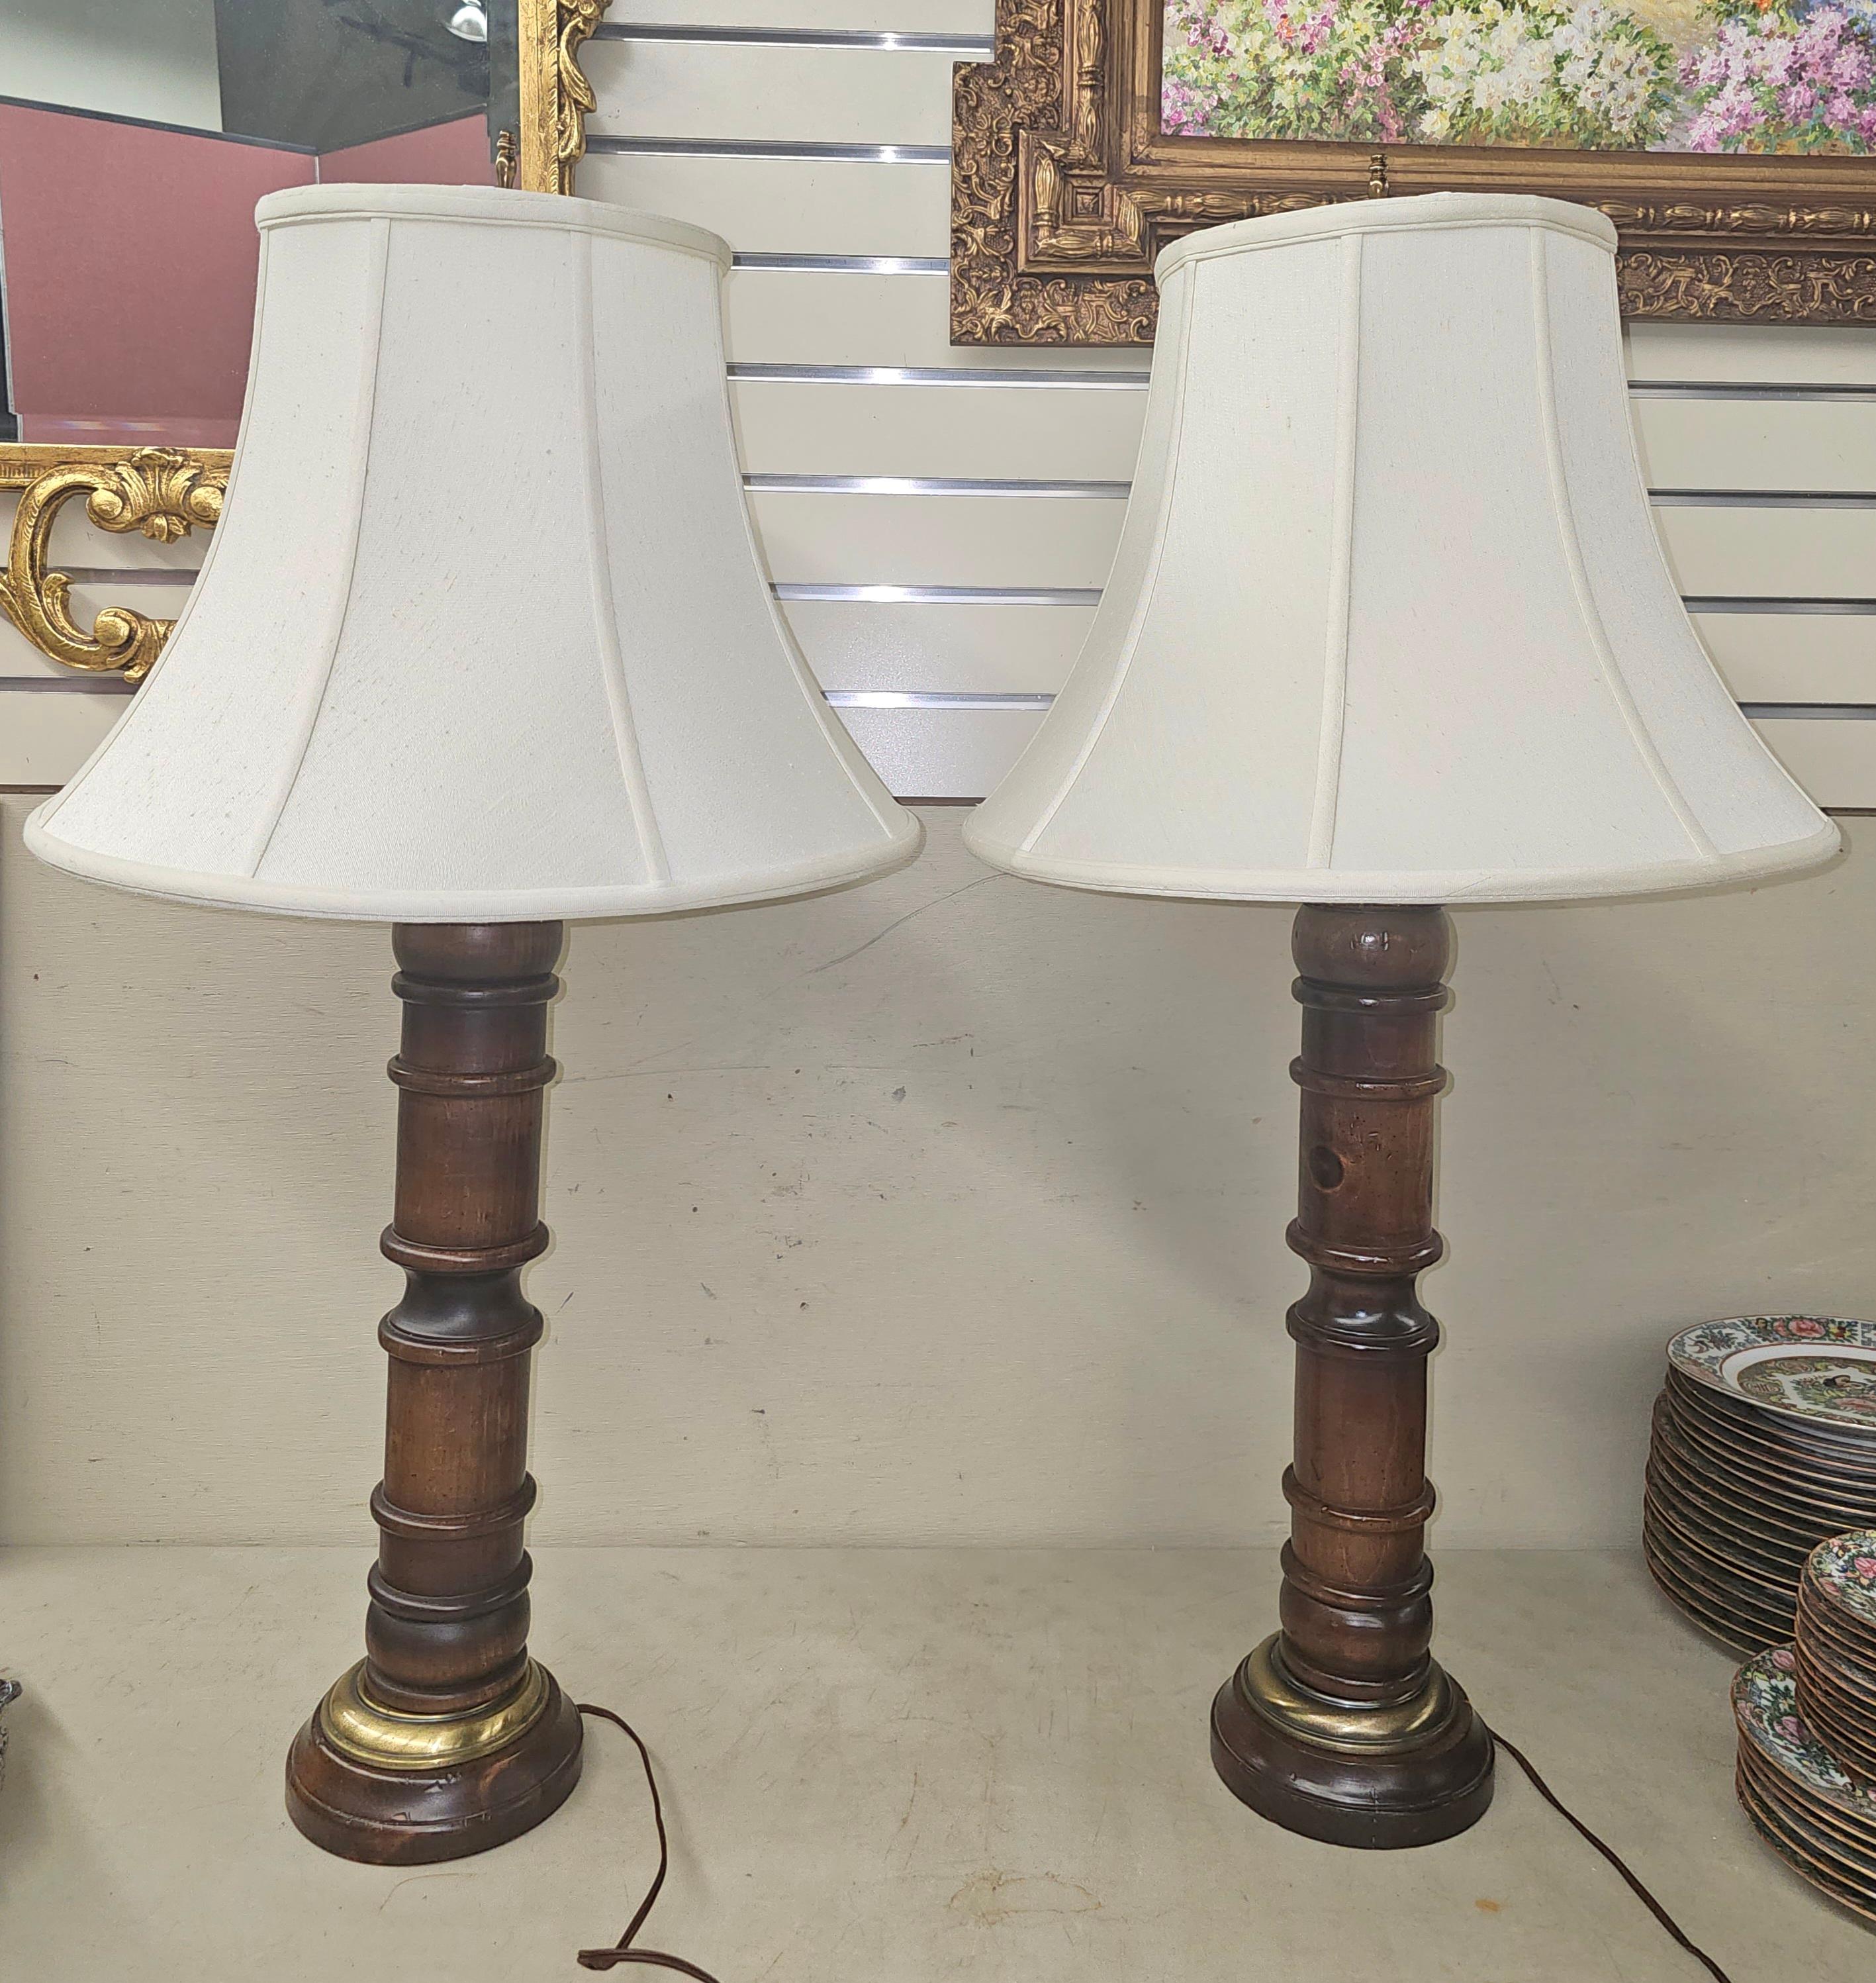 20th Century Pair Of Antiqued Pine Wood and Brass Column-Form Table Lamps For Sale